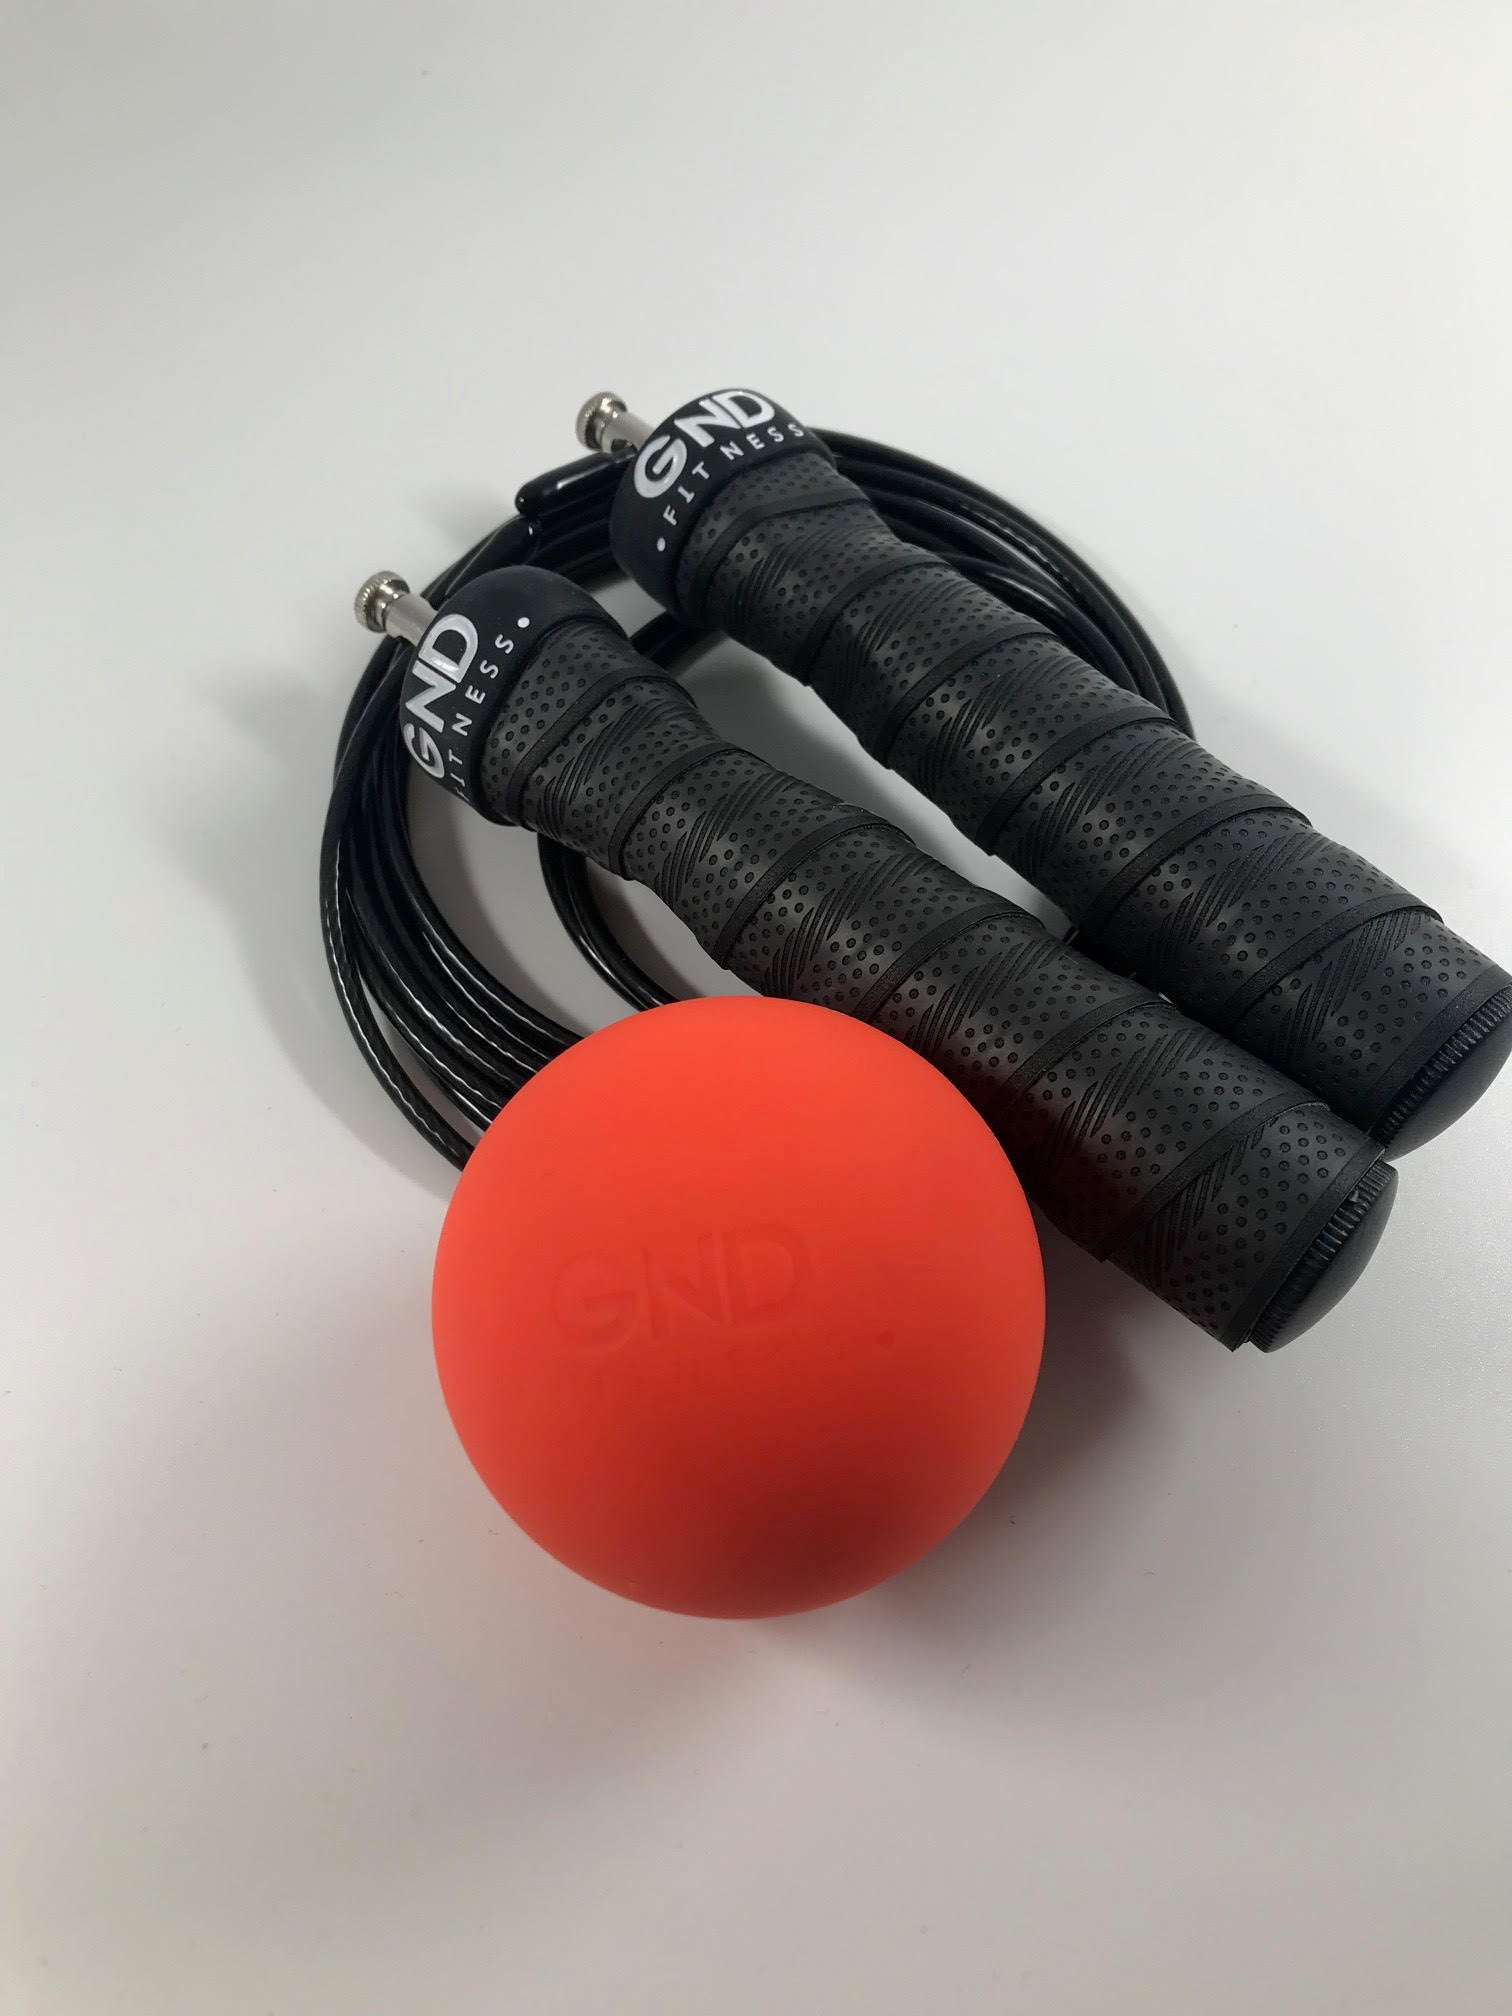 GND Lacrosse Ball & Skipping Rope // Pack - Skipping Rope- GND Fitness